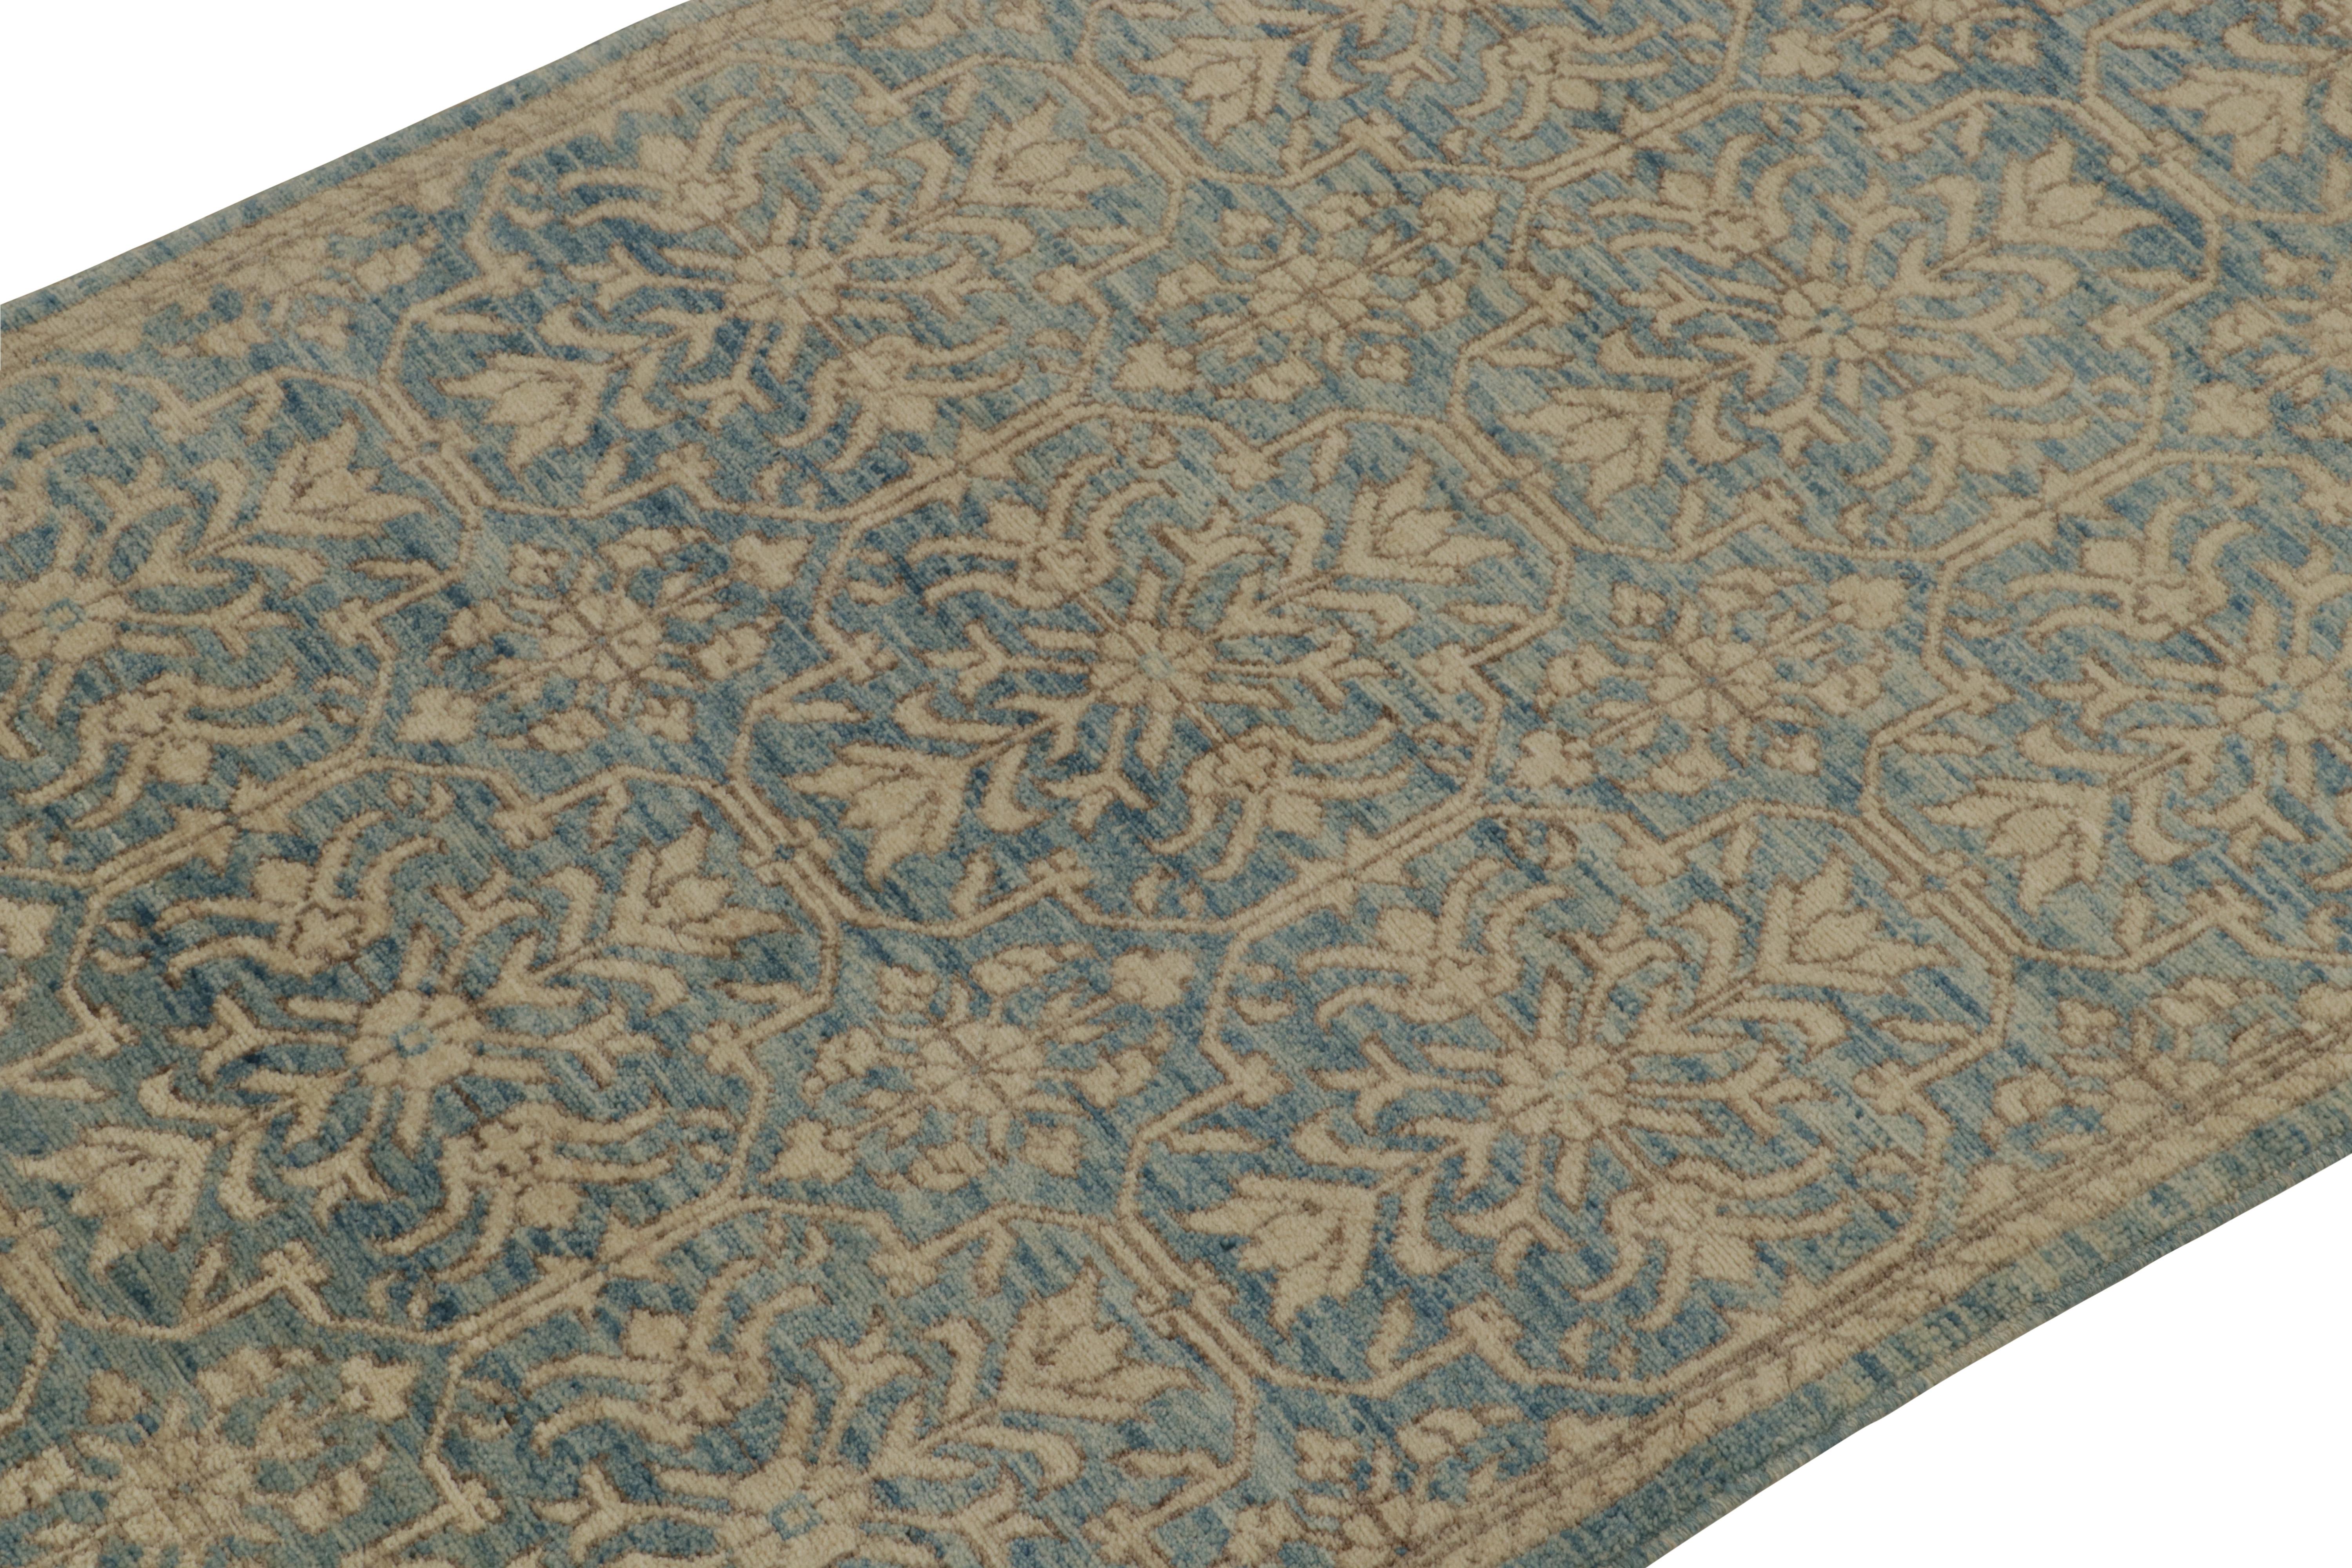 Afghan Rug & Kilim’s Contemporary Rug in Blue with Beige-Brown Floral Patterns For Sale